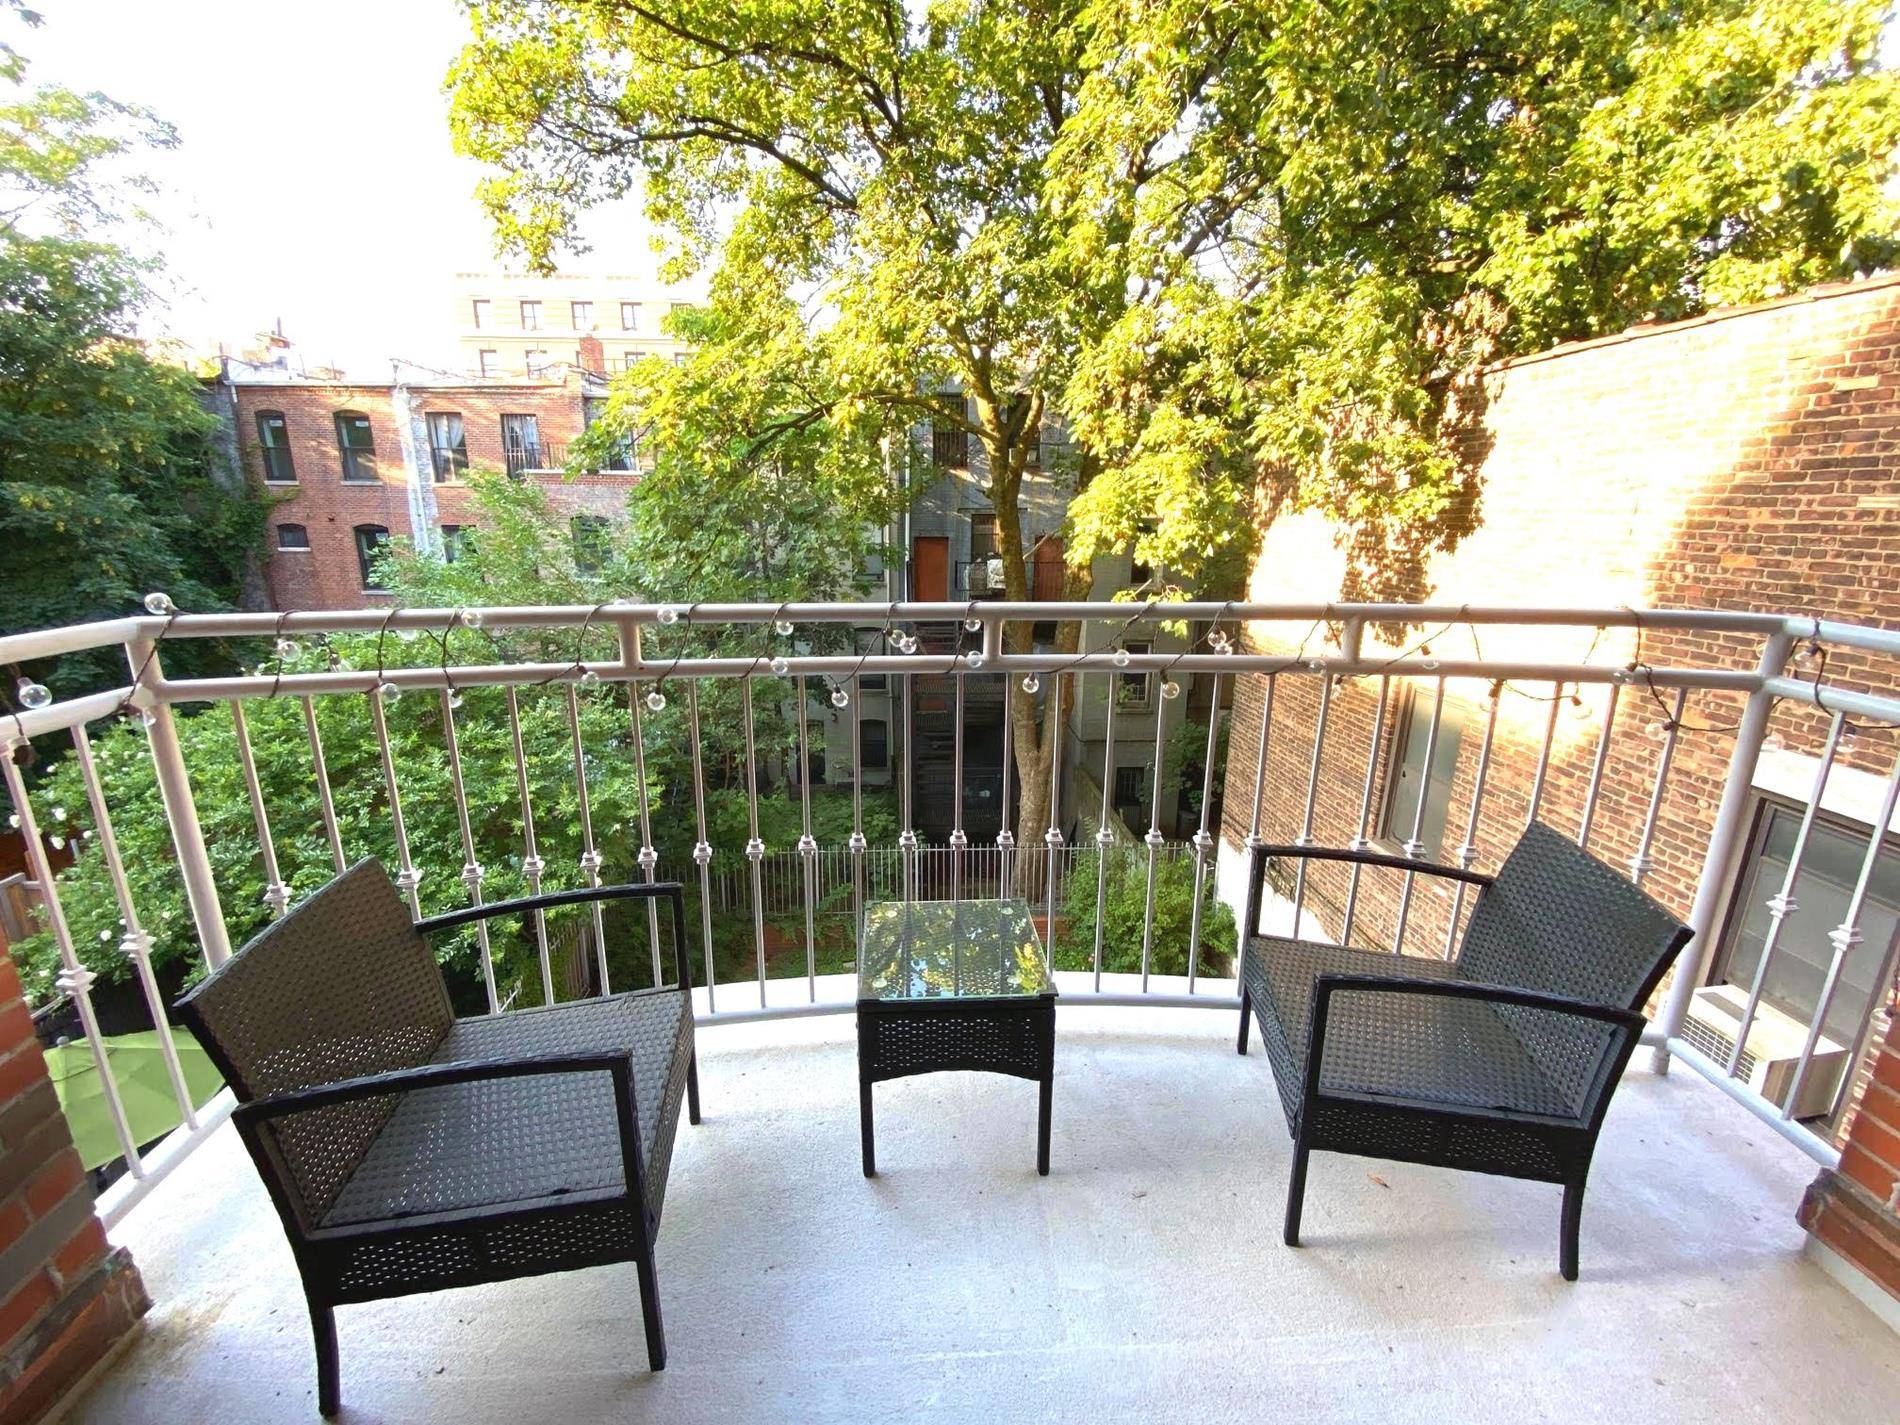 Enjoy large two bedroom apartment in historical Hamilton Heights for a great price.